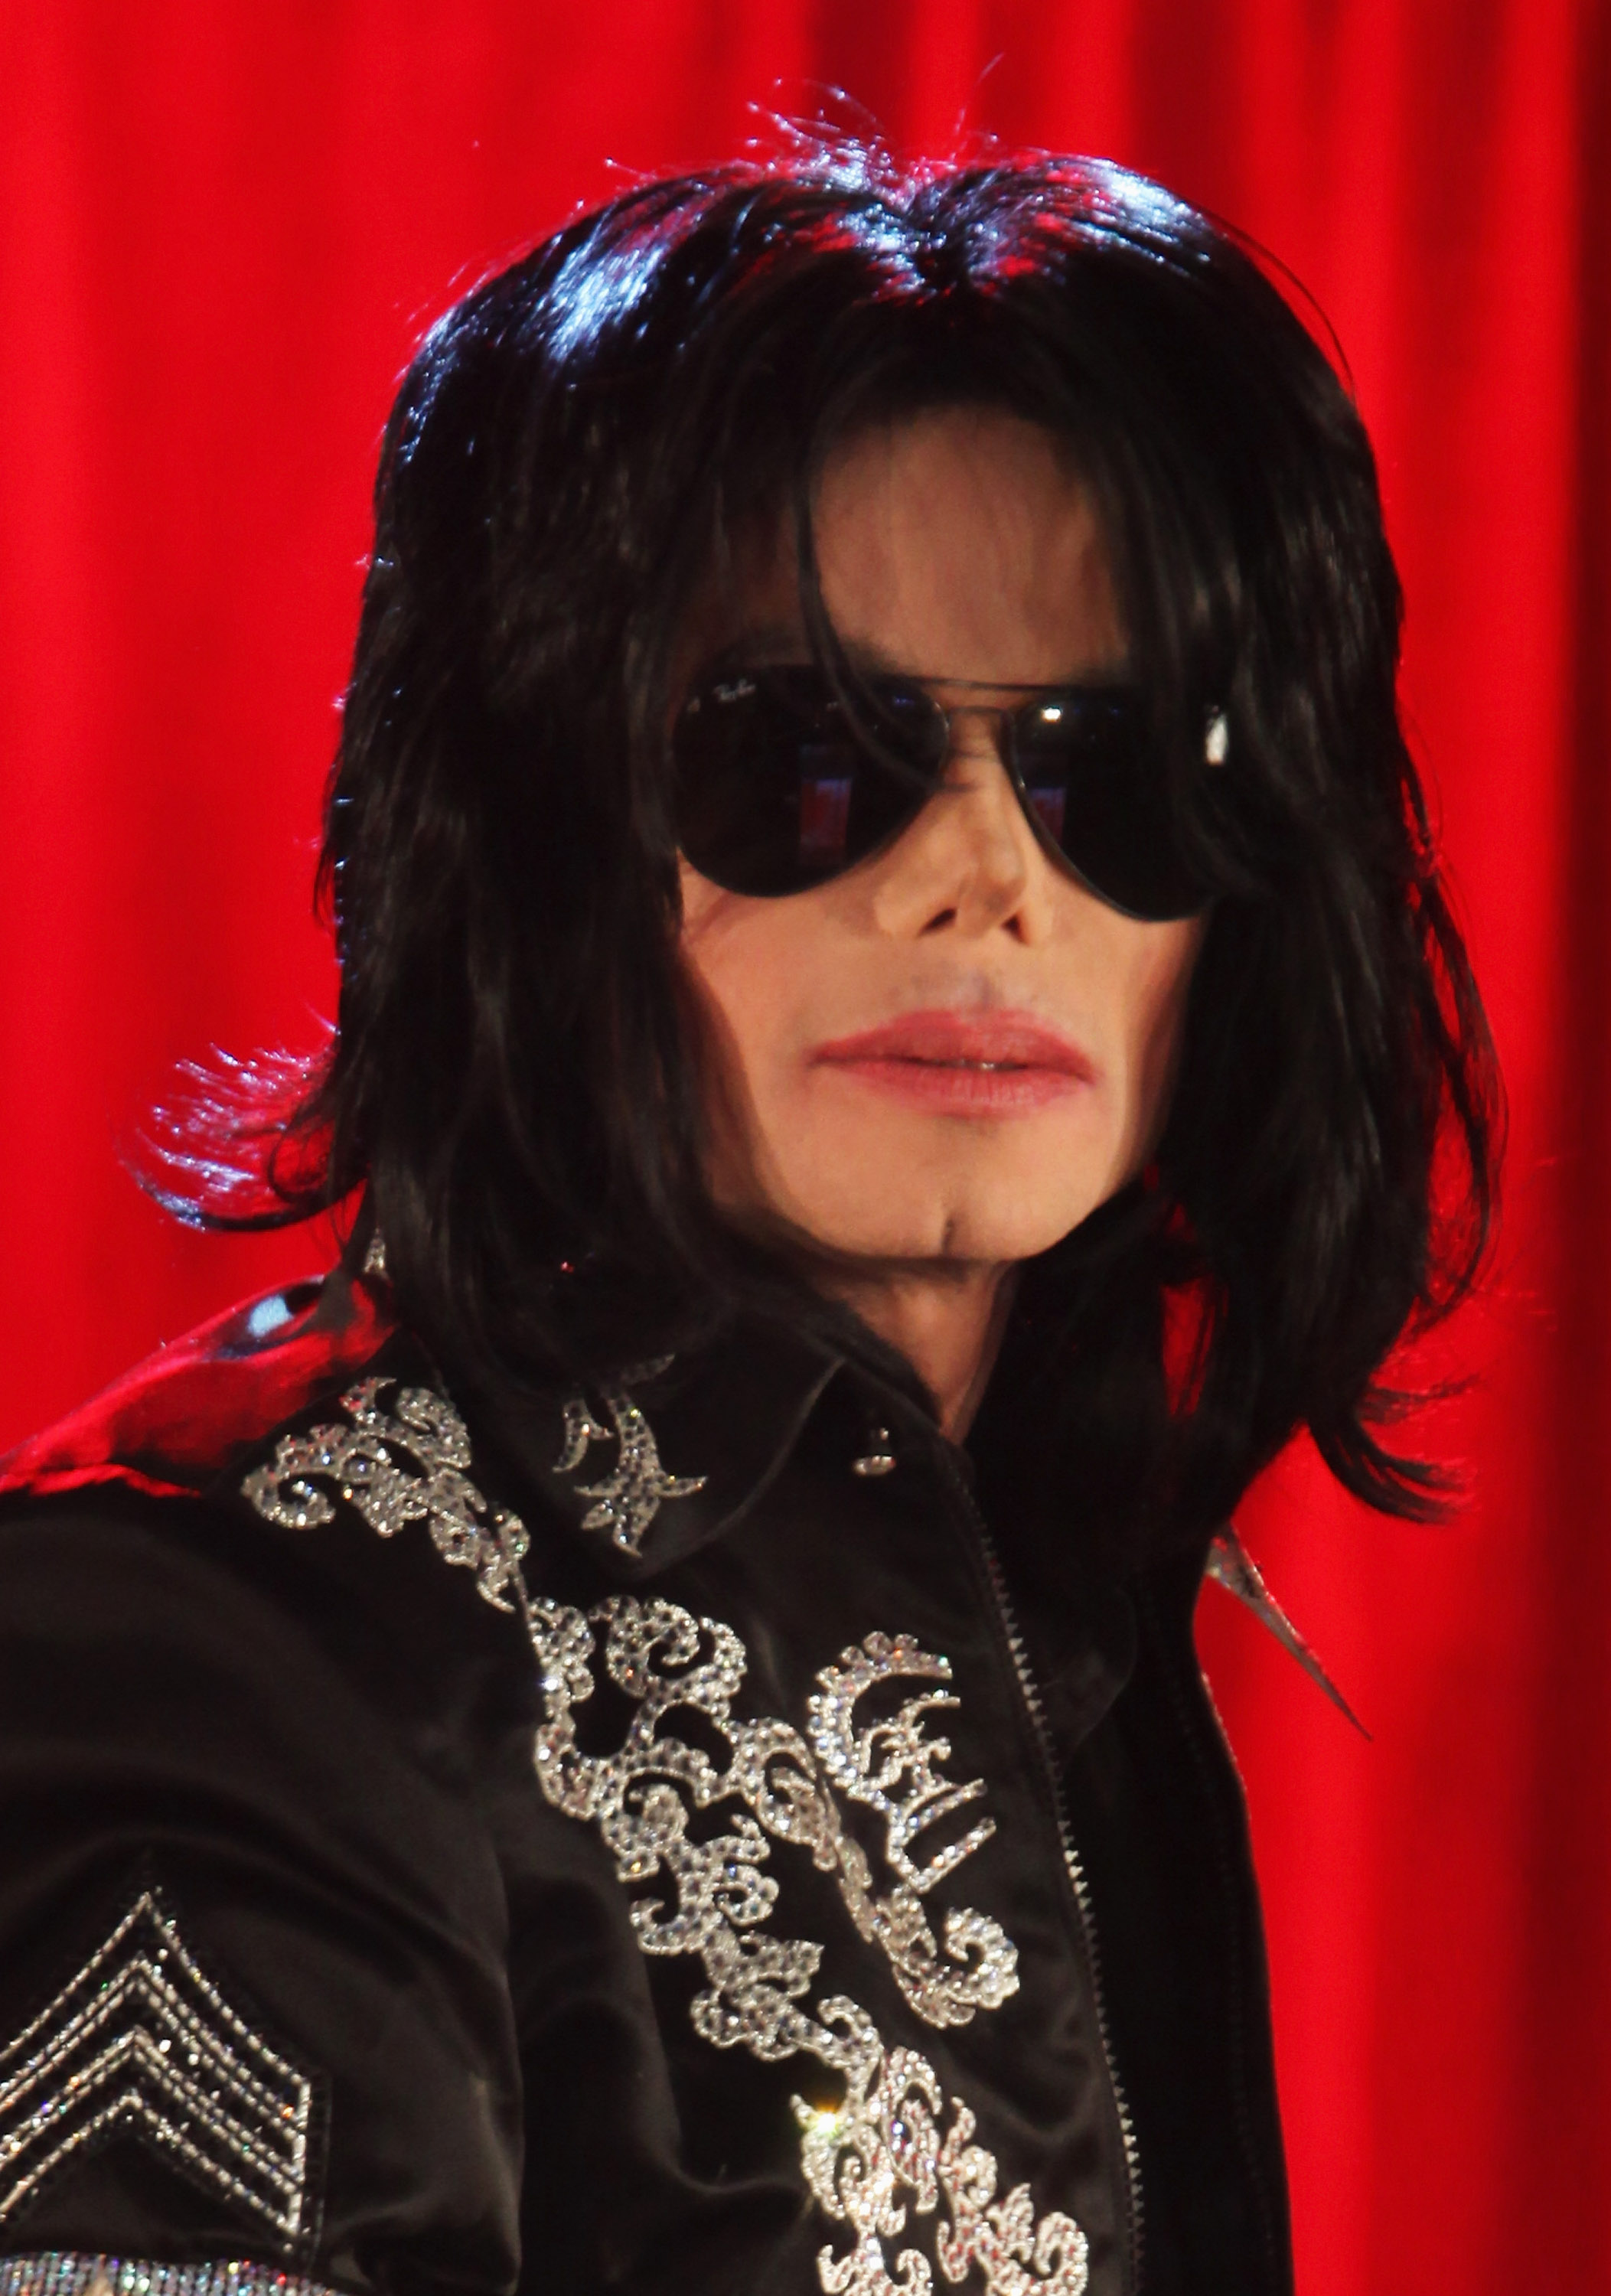 Michael Jackson on March 5, 2009 in London, England | Source: Getty Images